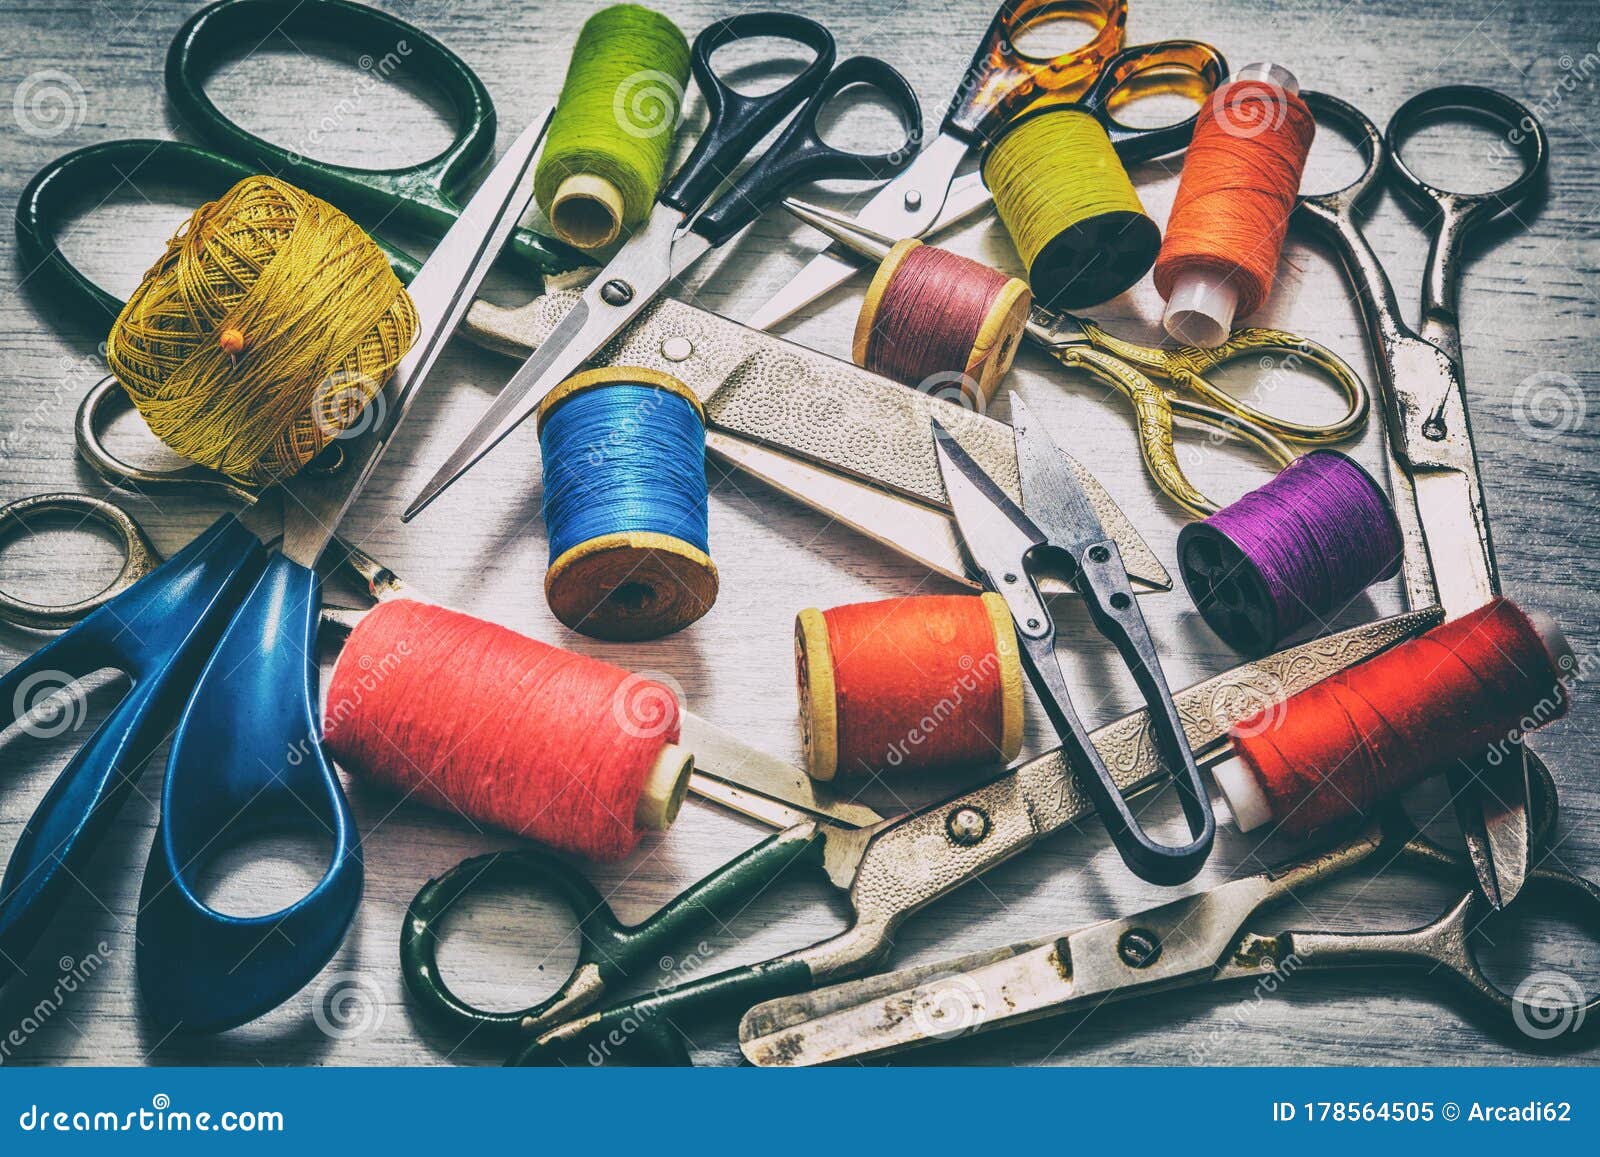 Sewing Tools and Accessories Stock Image - Image of hobby ...